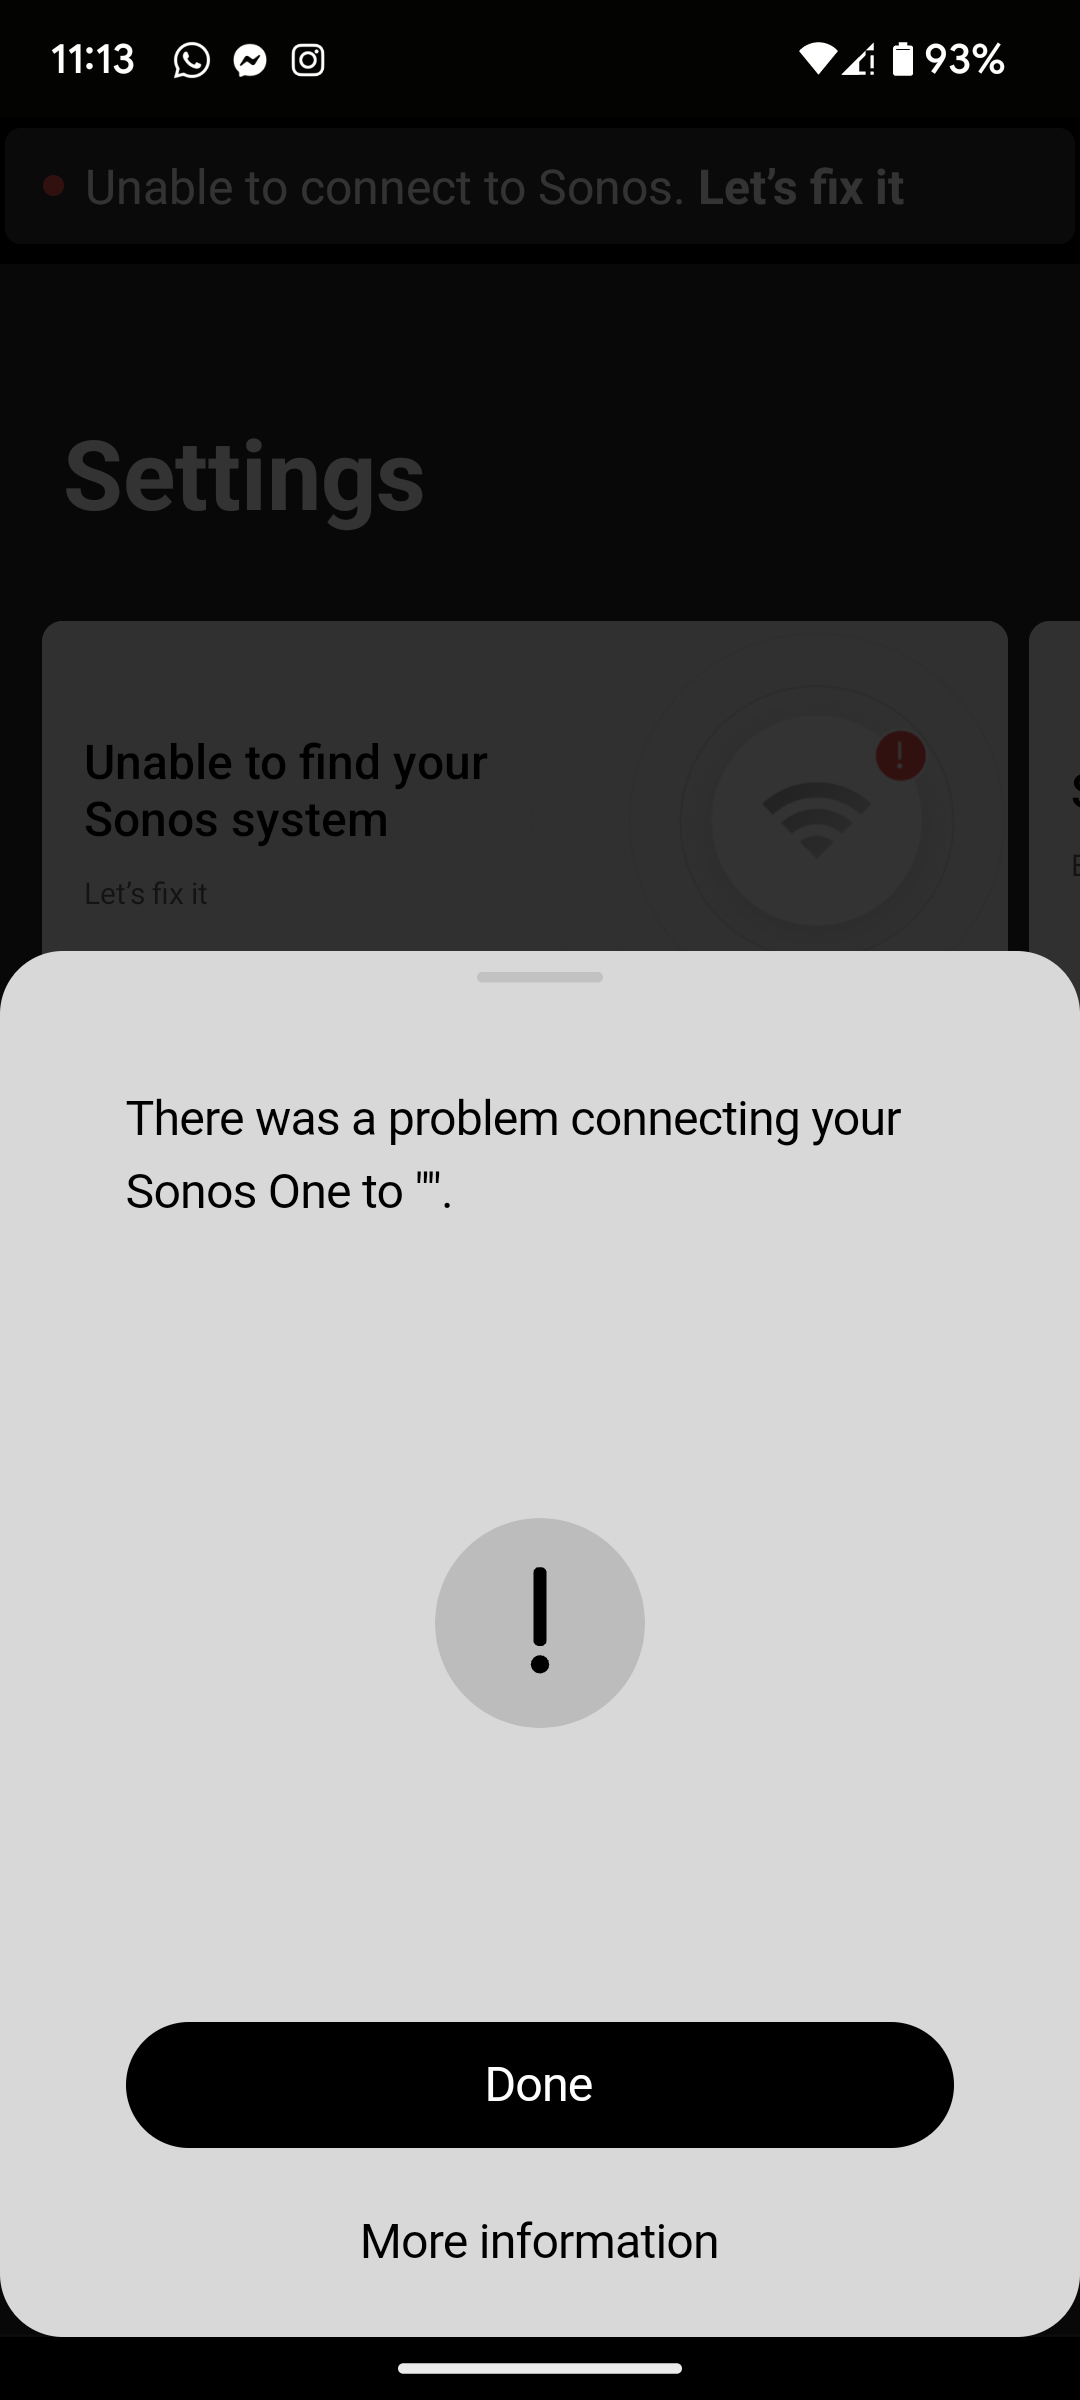 Vag Løfte smække There was a problem connecting your Sonos One to ". | Sonos Community